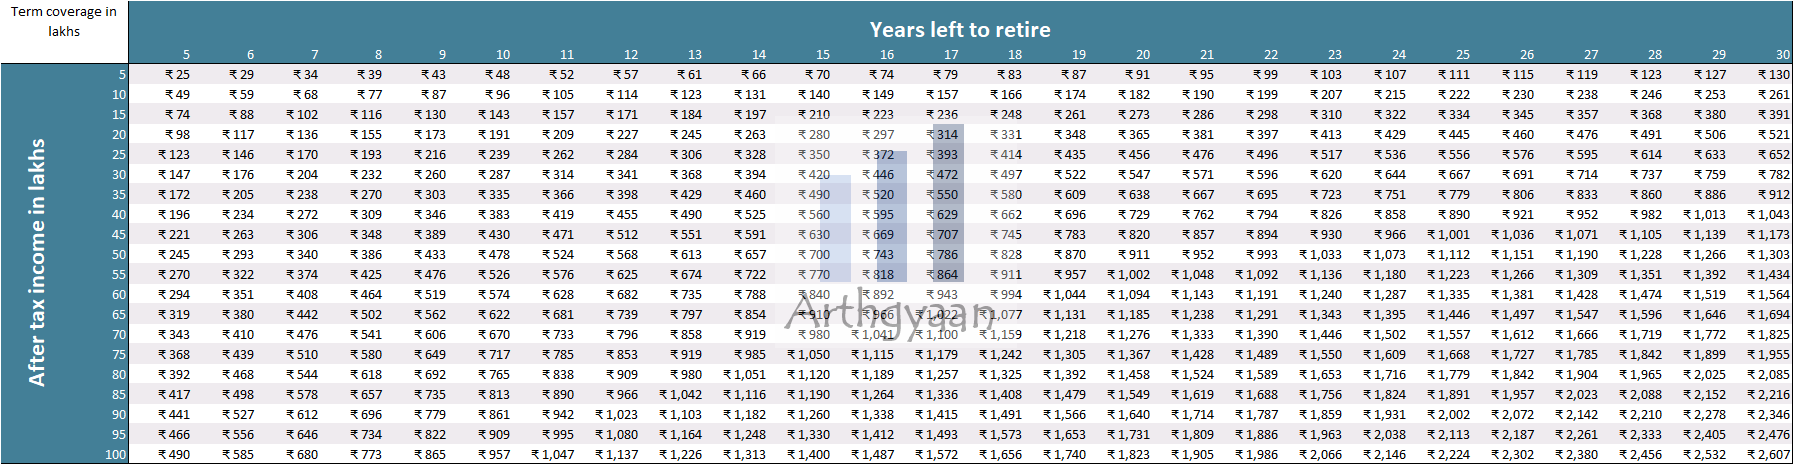 Term insurance coverage amount in lakhs via HLV Income method: real rate = 1%